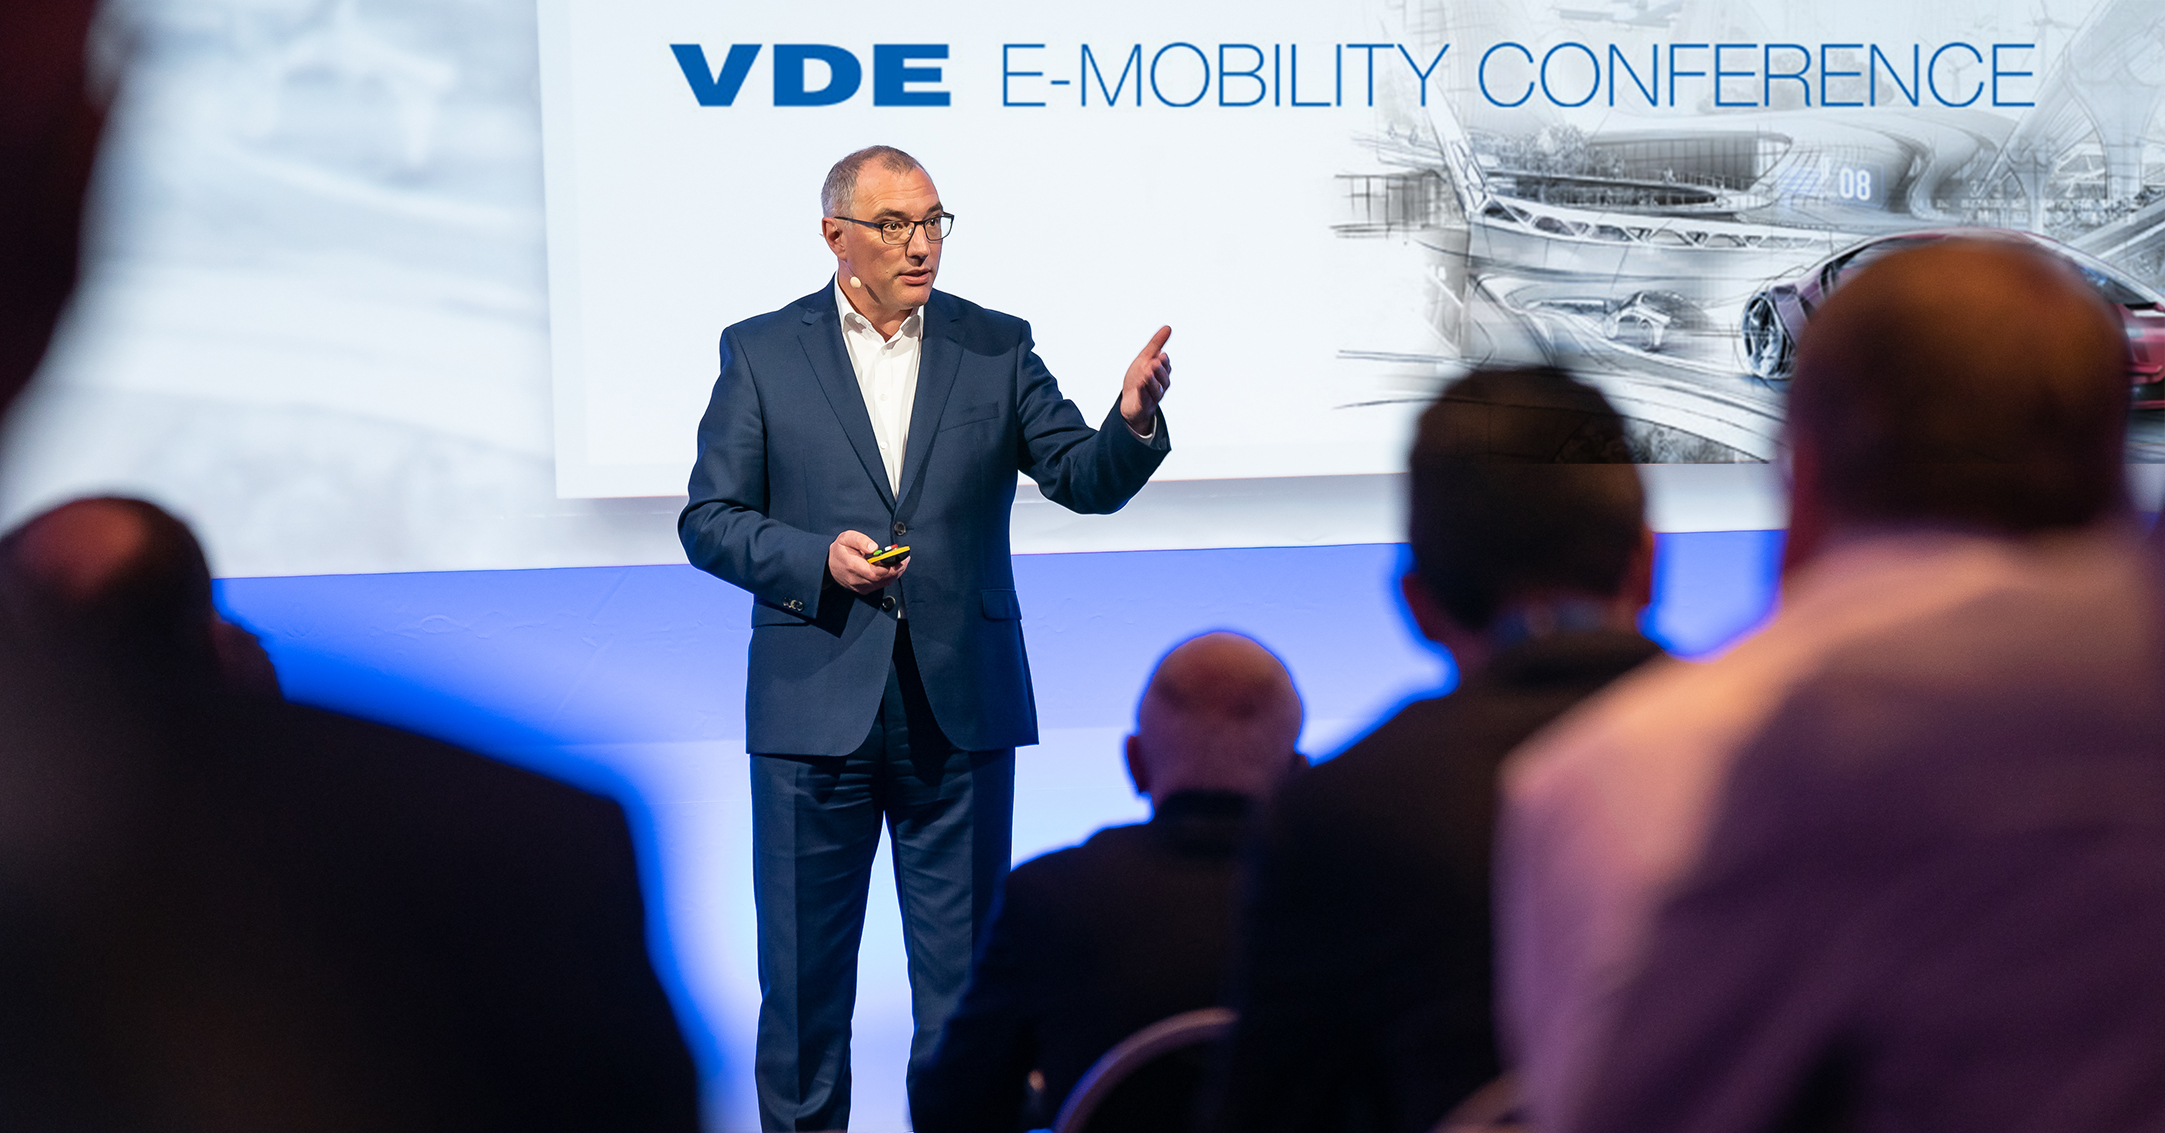 Andreas Marx, VDE E-Mobility Conference